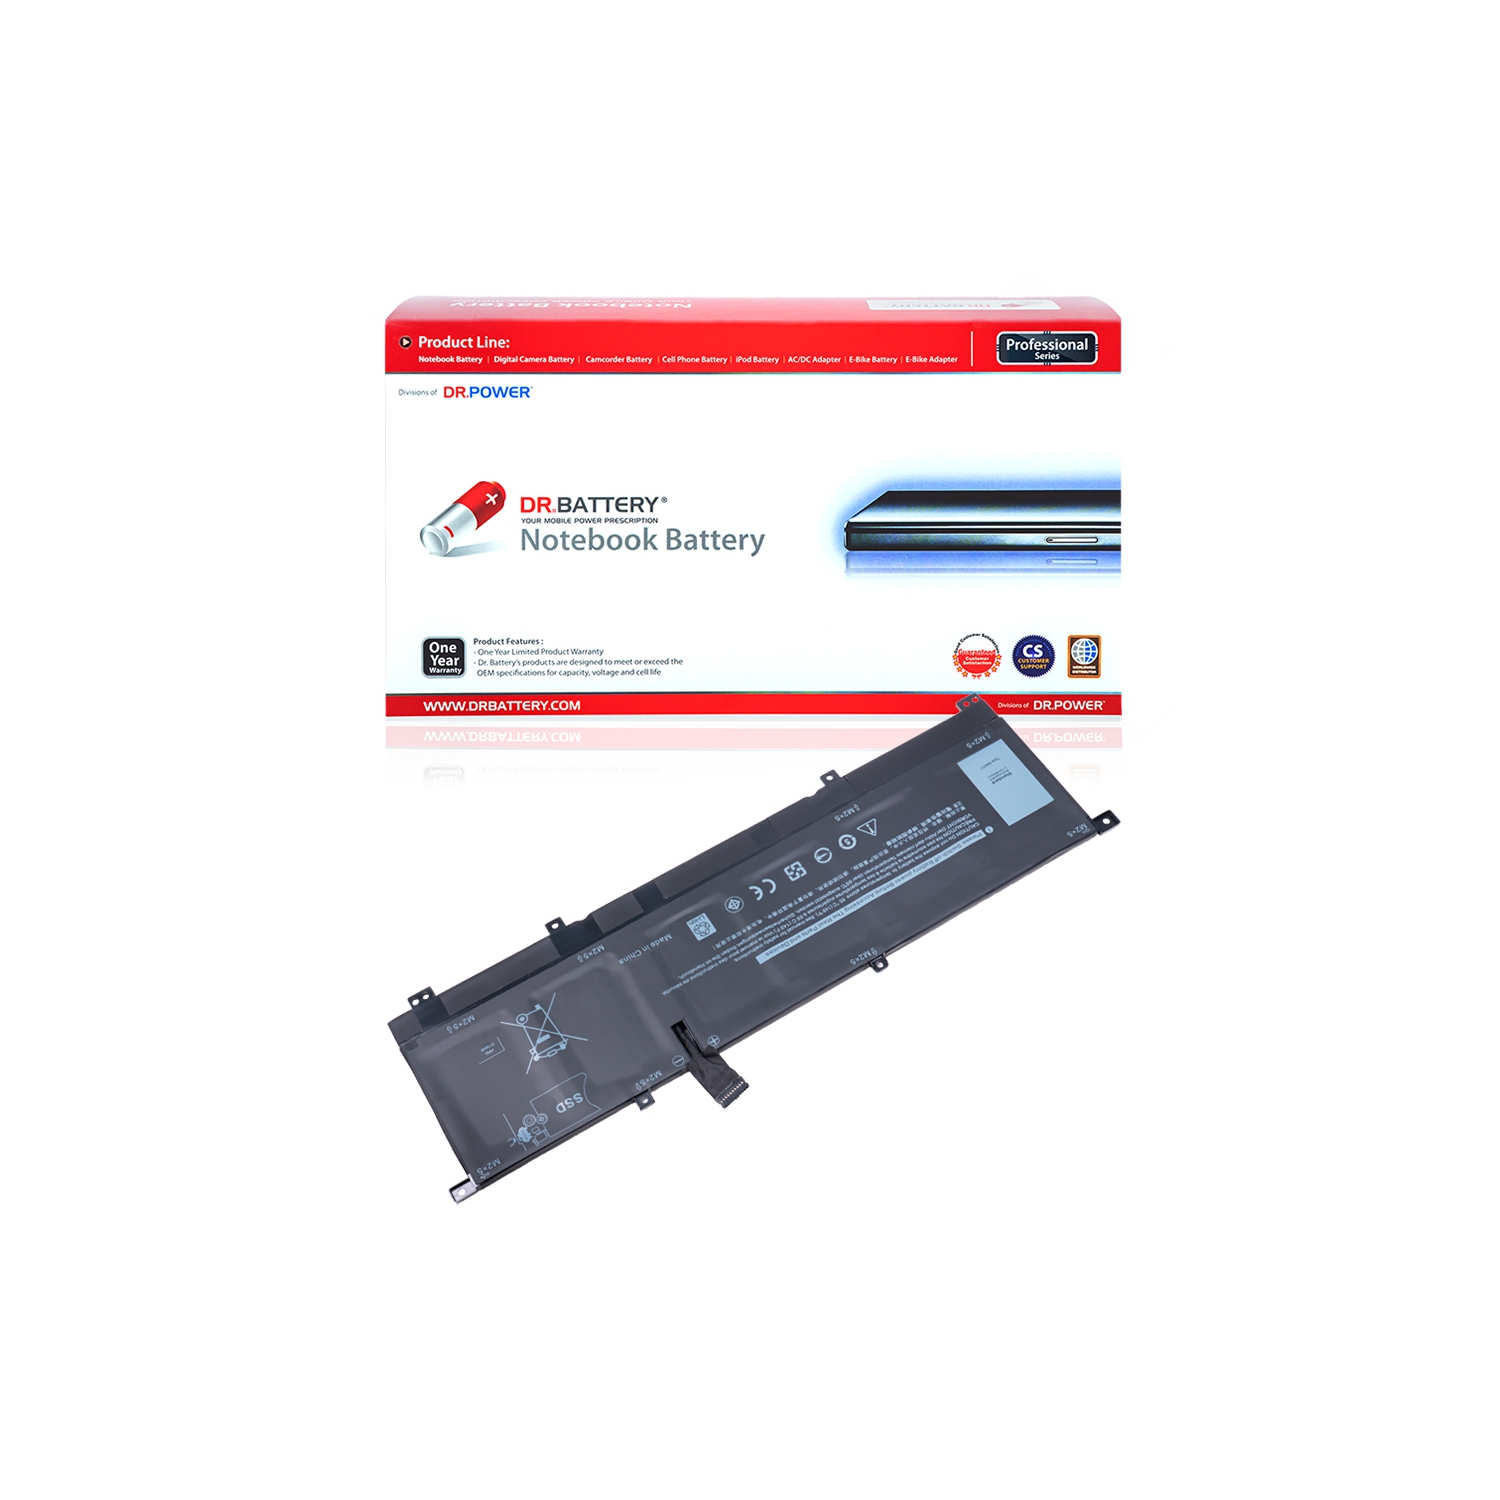 DR. BATTERY - Replacement for Dell XPS 15 2-in-1 / 15 9575 / 15 9575 i5-8305G / 15 9575 i7-8705G / TMFYT / 0TMFYT / 8N0T7